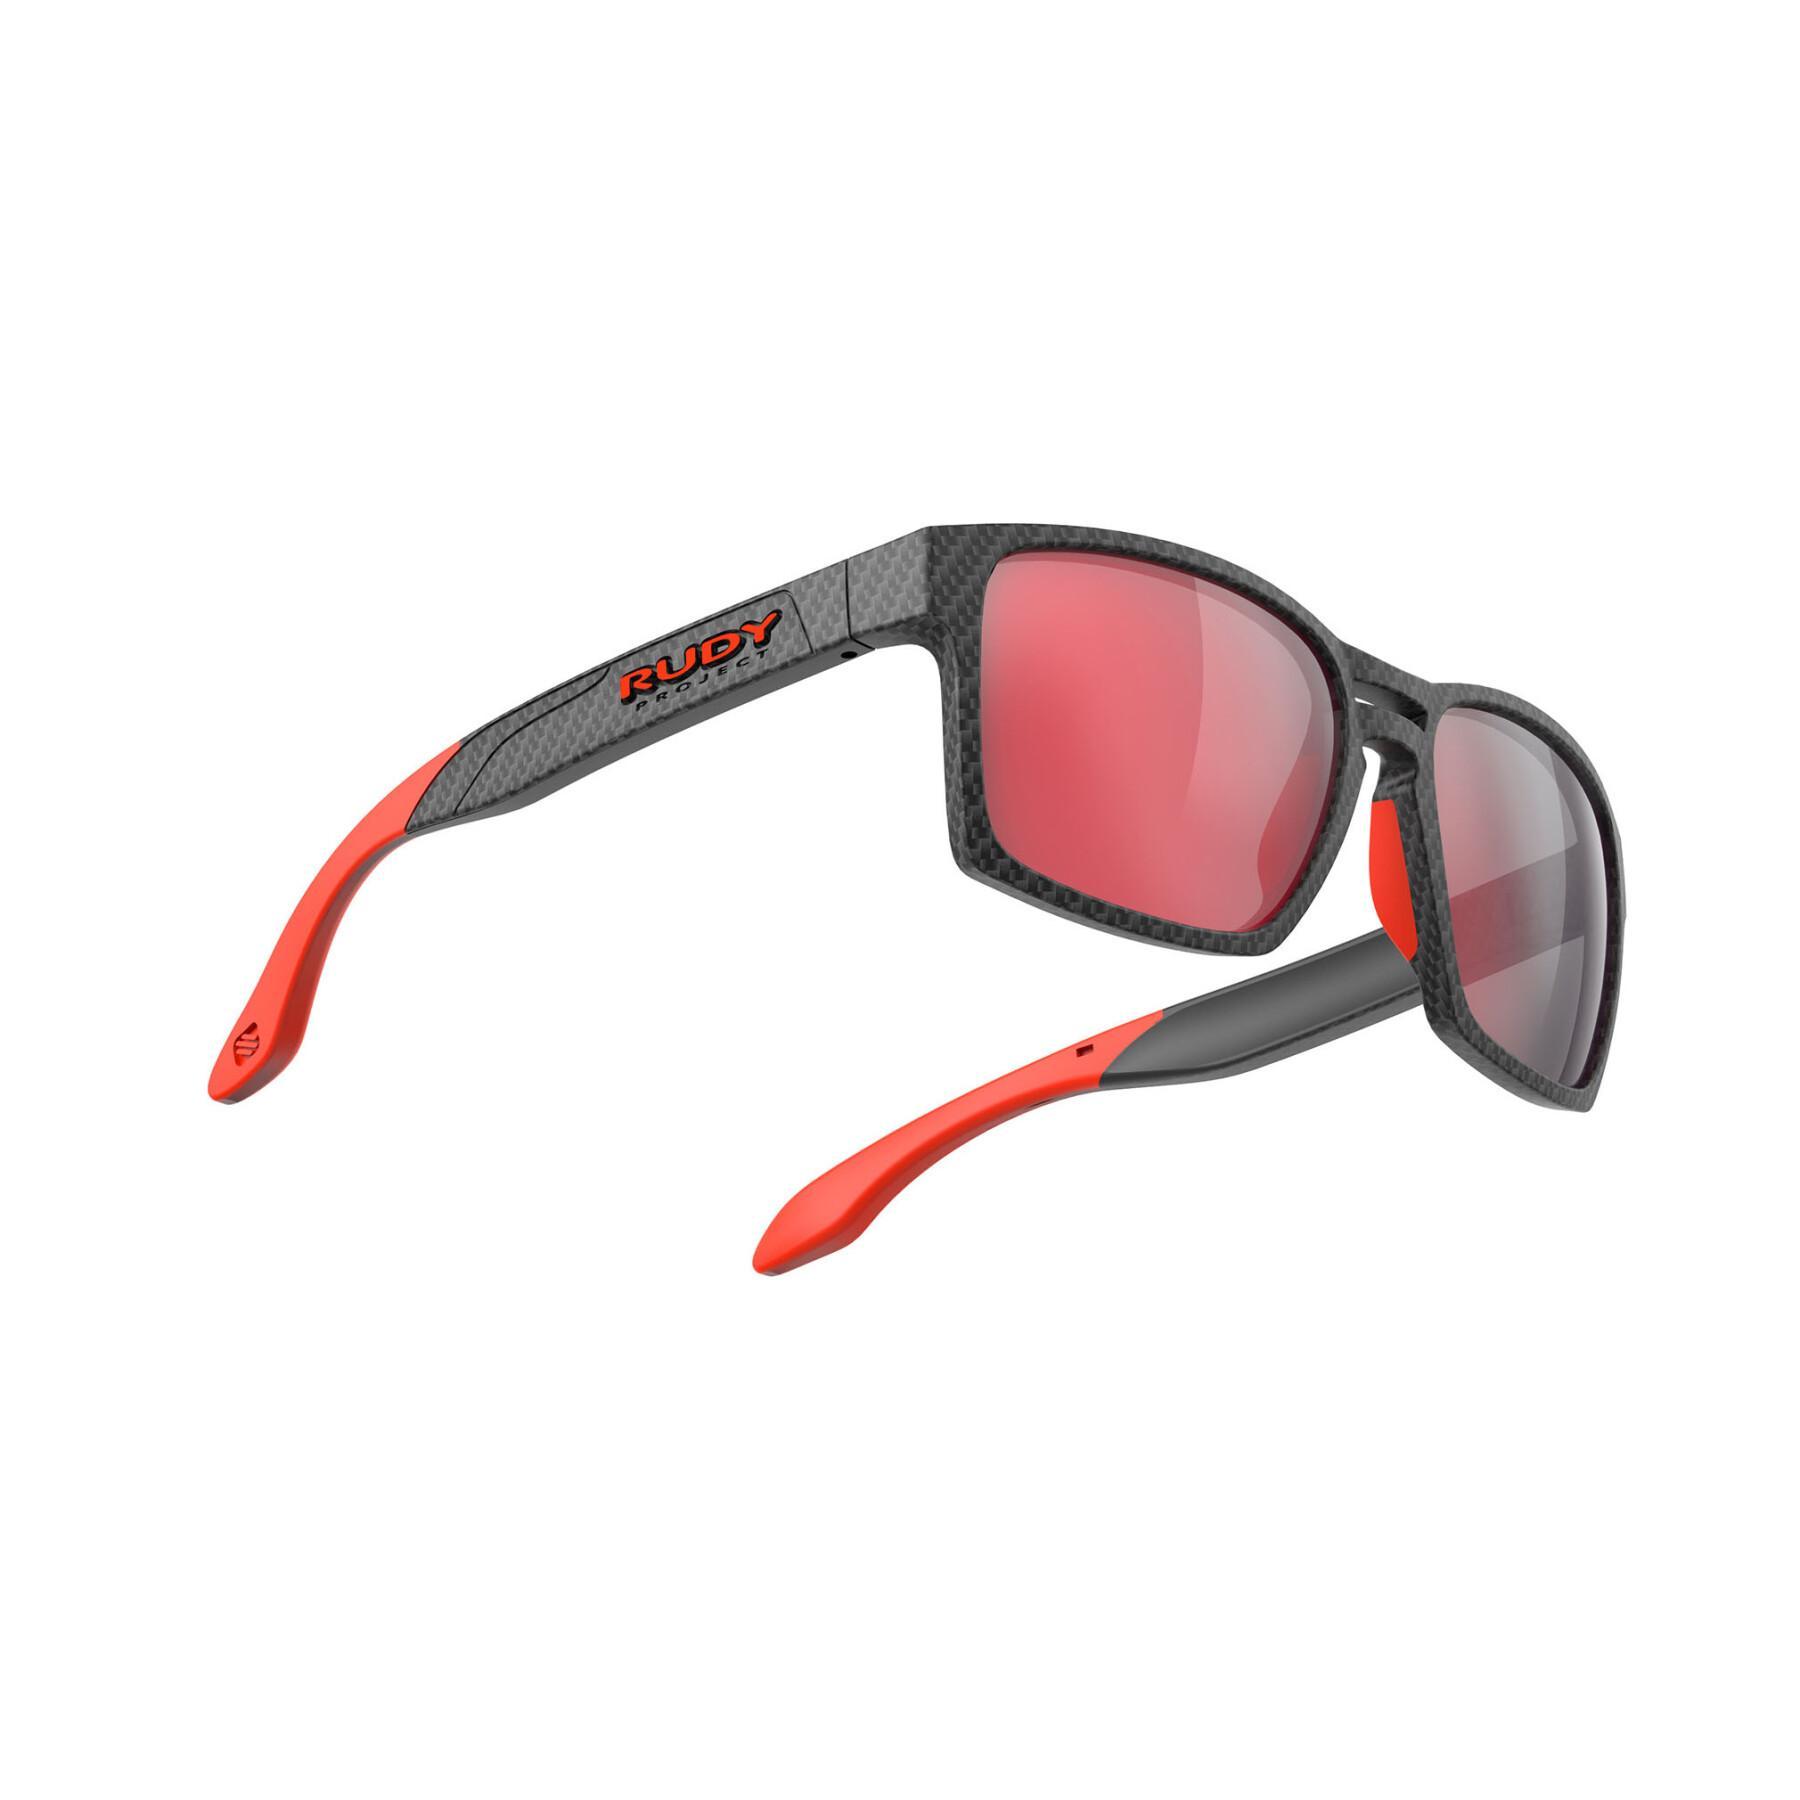 Sunglasses Rudy Project spinair 57